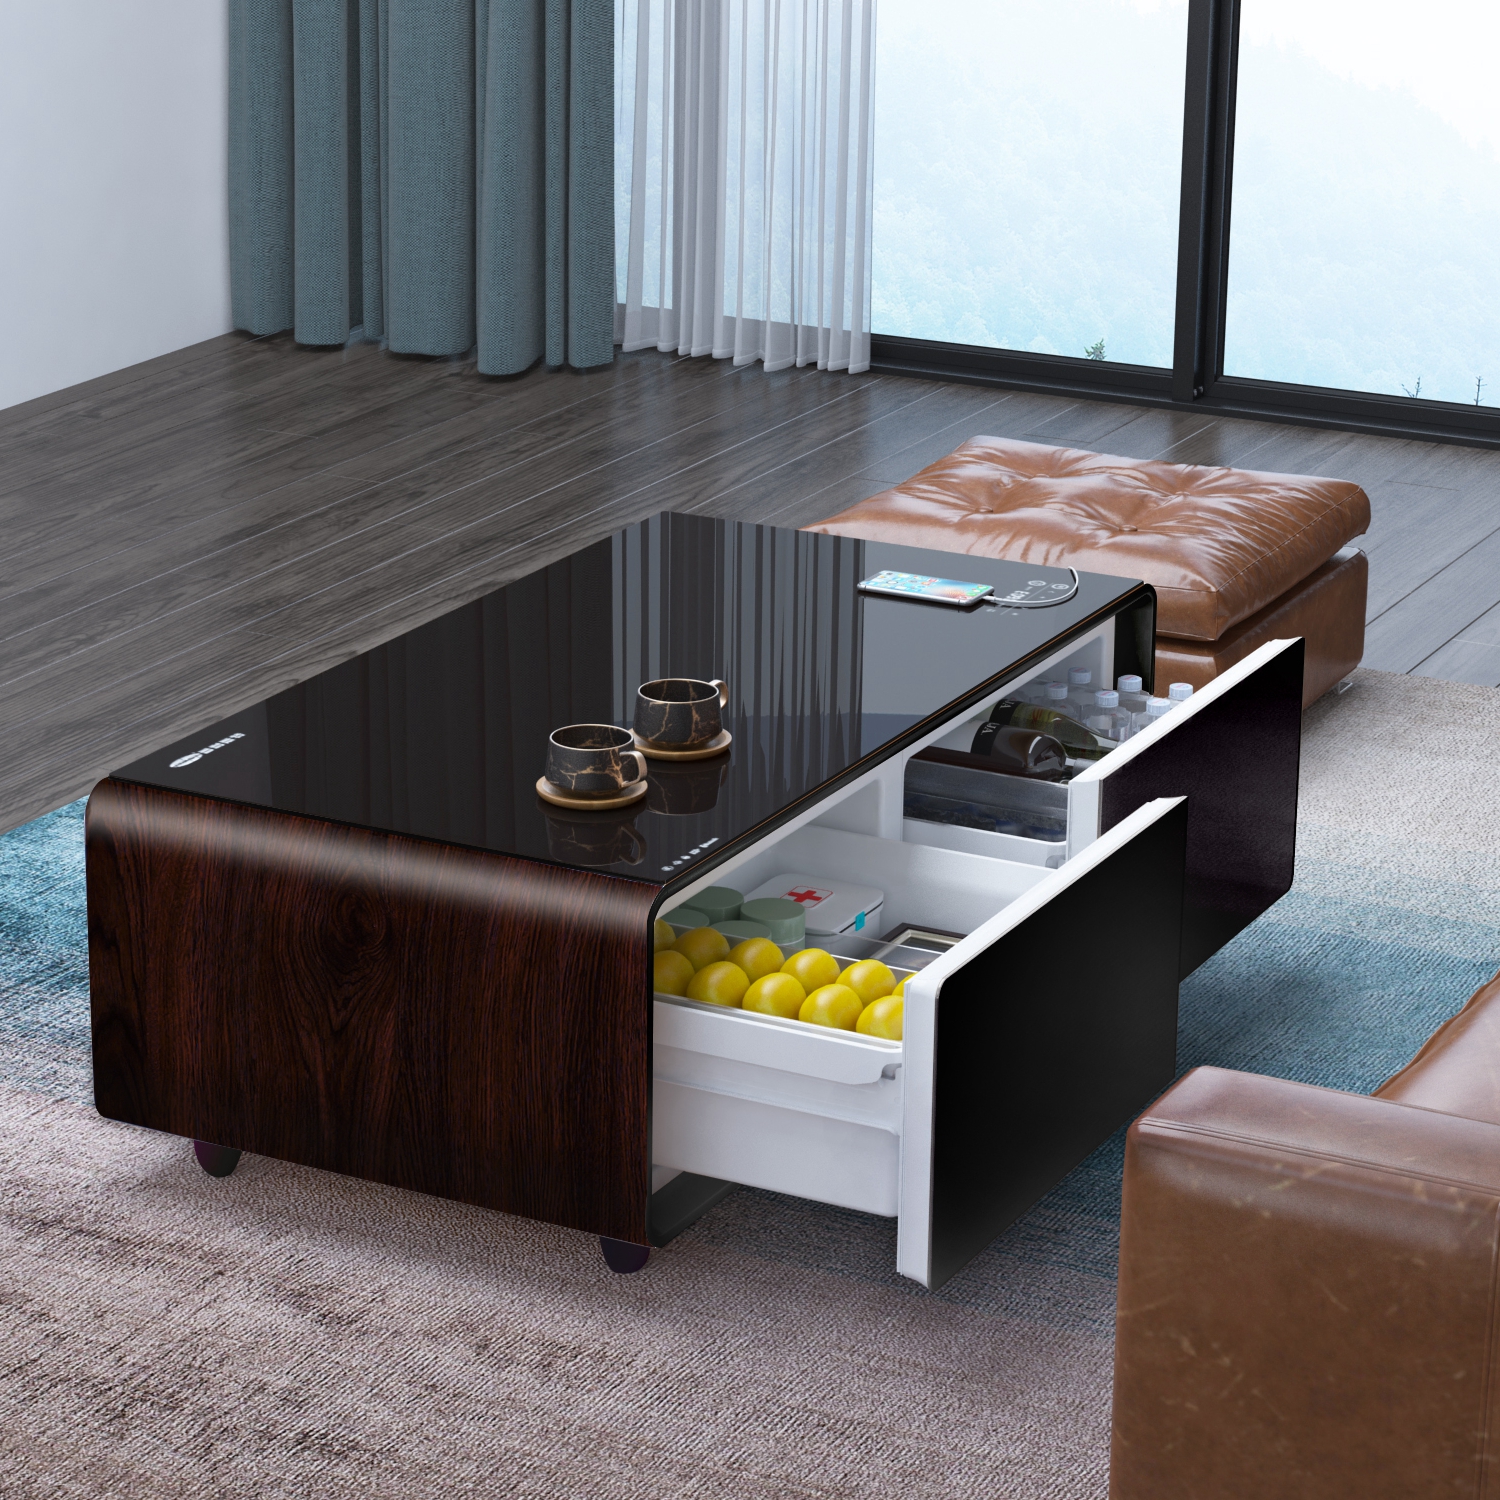 Smart Coffee Table with Fridge SCT-130L Wooden